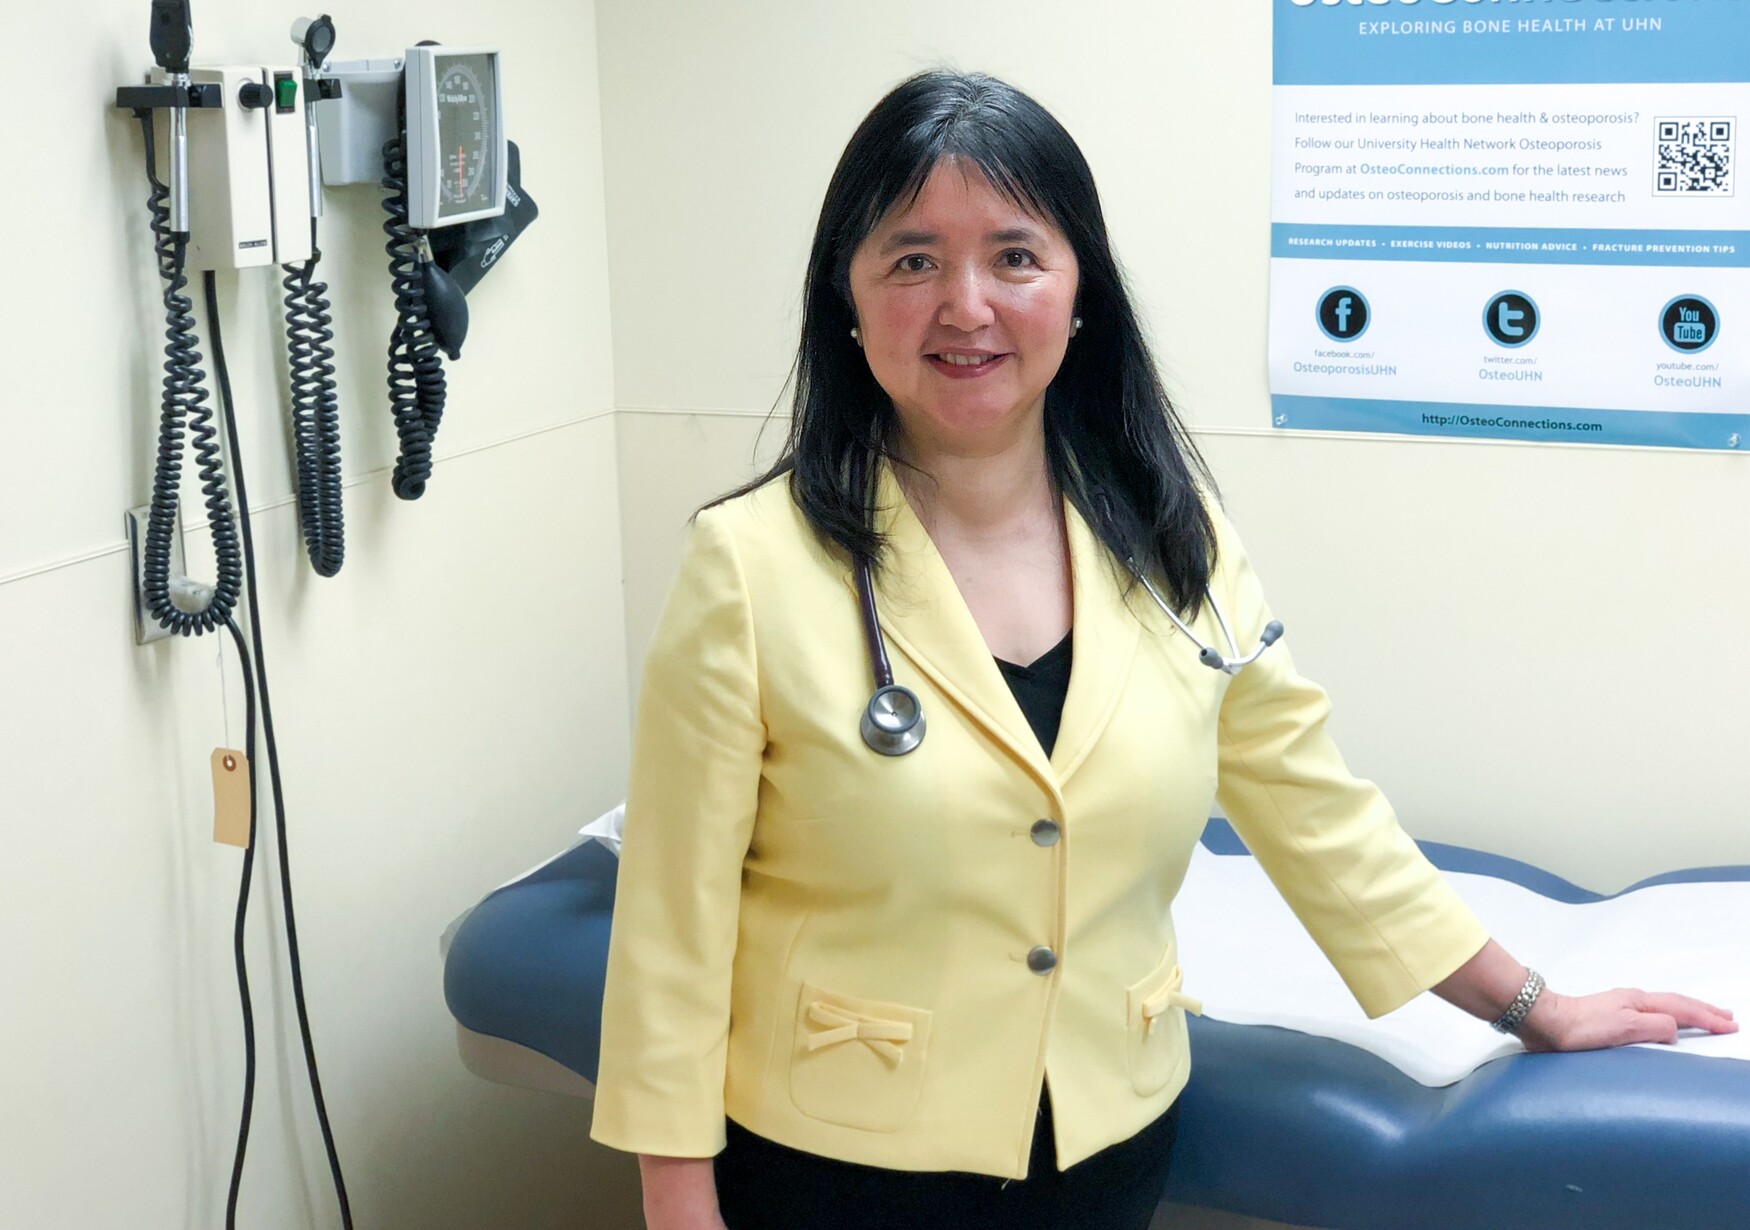 Dr. Angela Cheung, photo by Jessica Chang